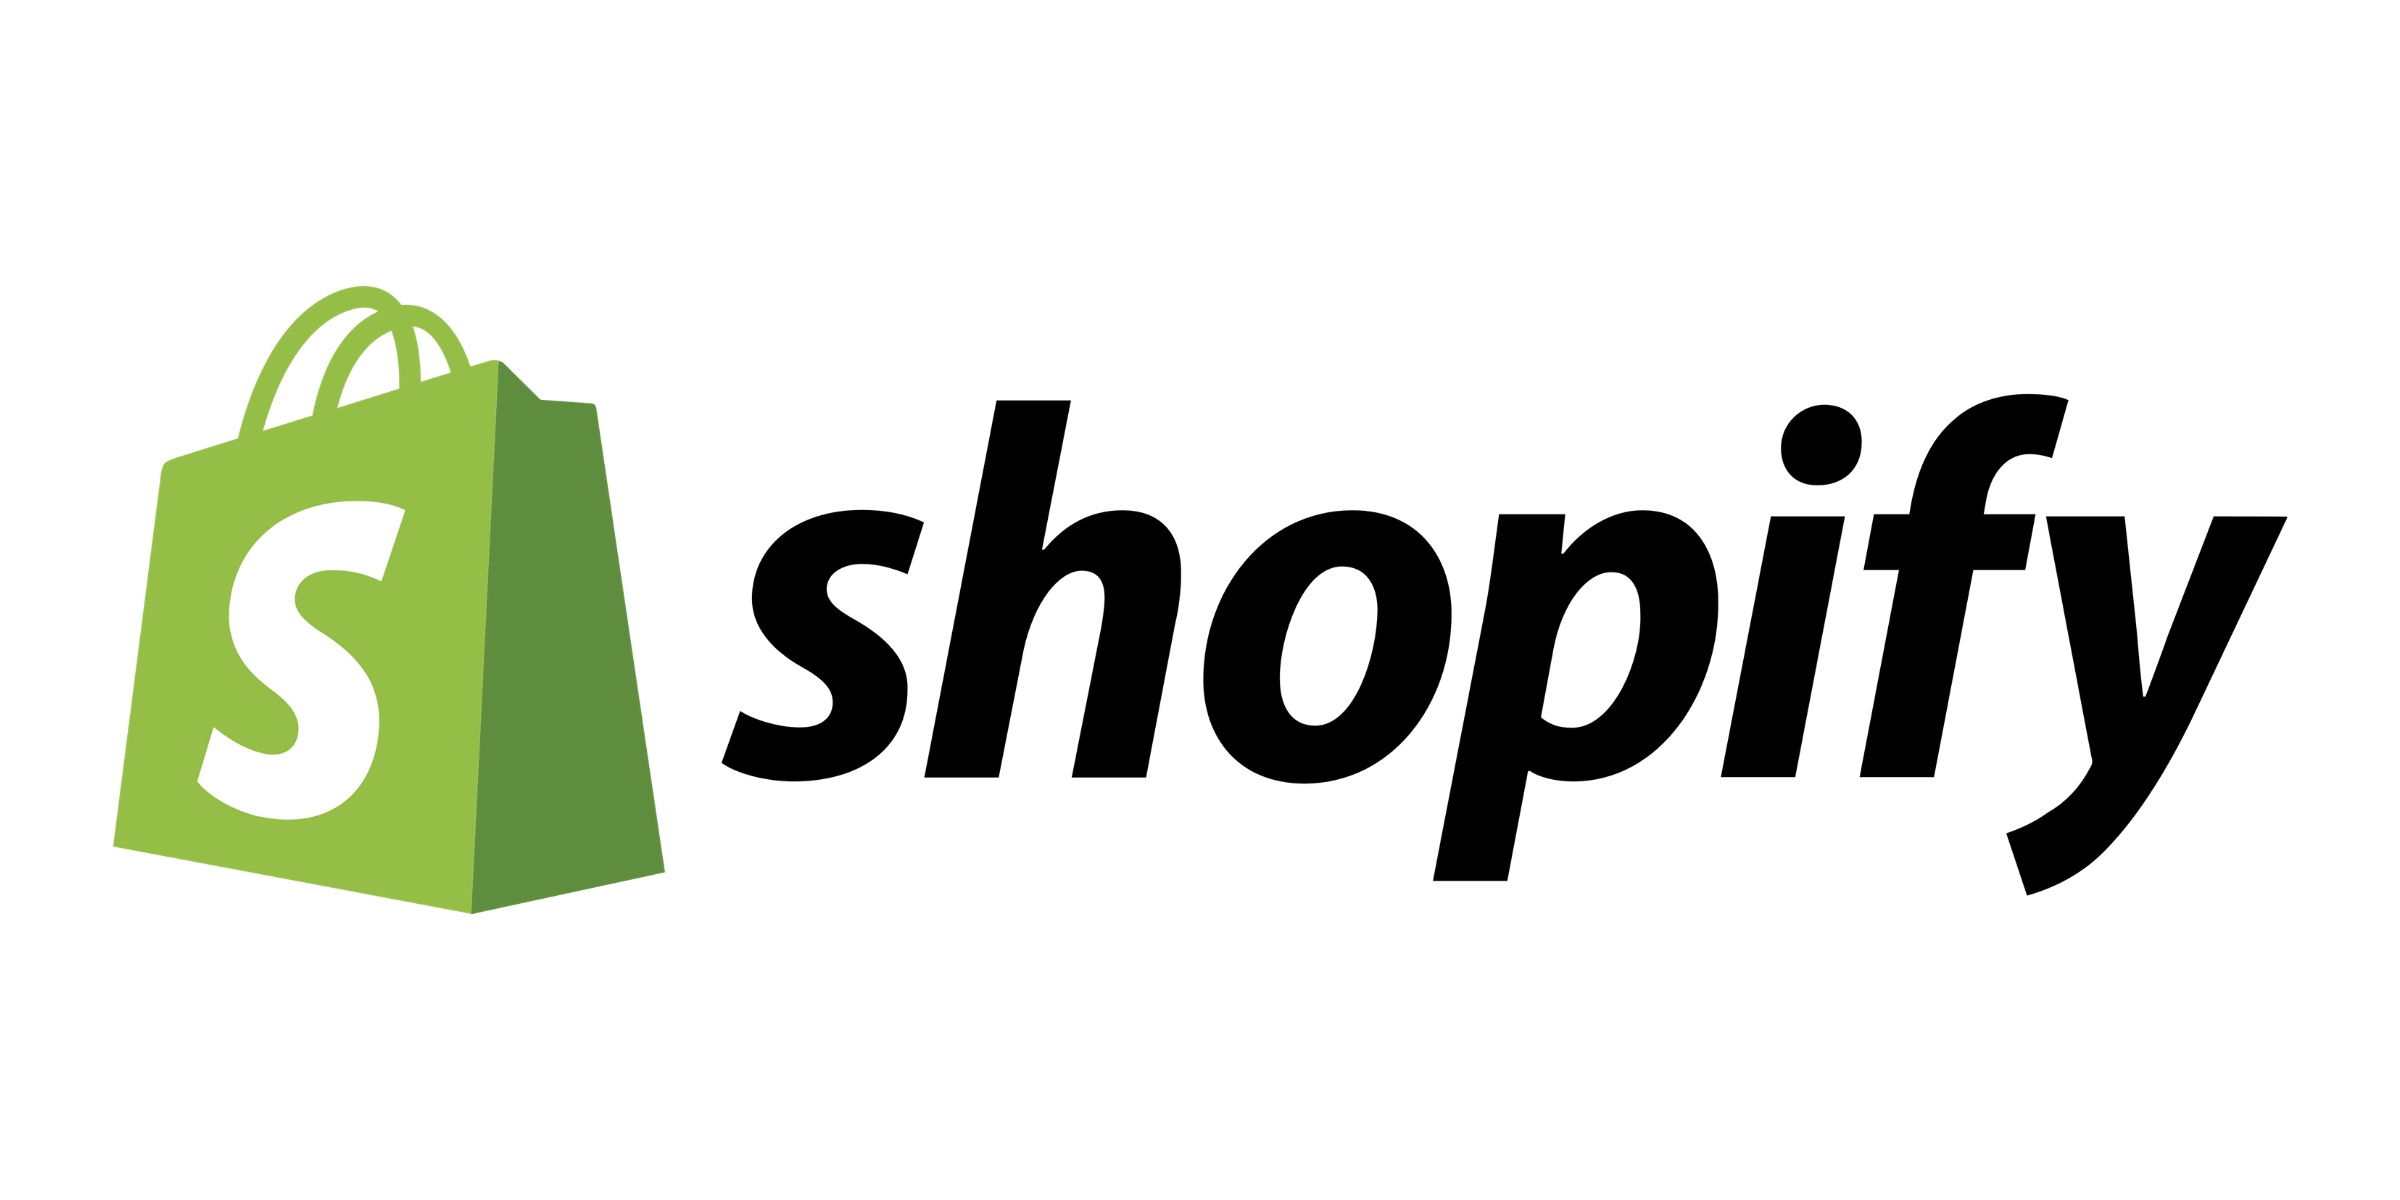 Dropshipping automation software partner